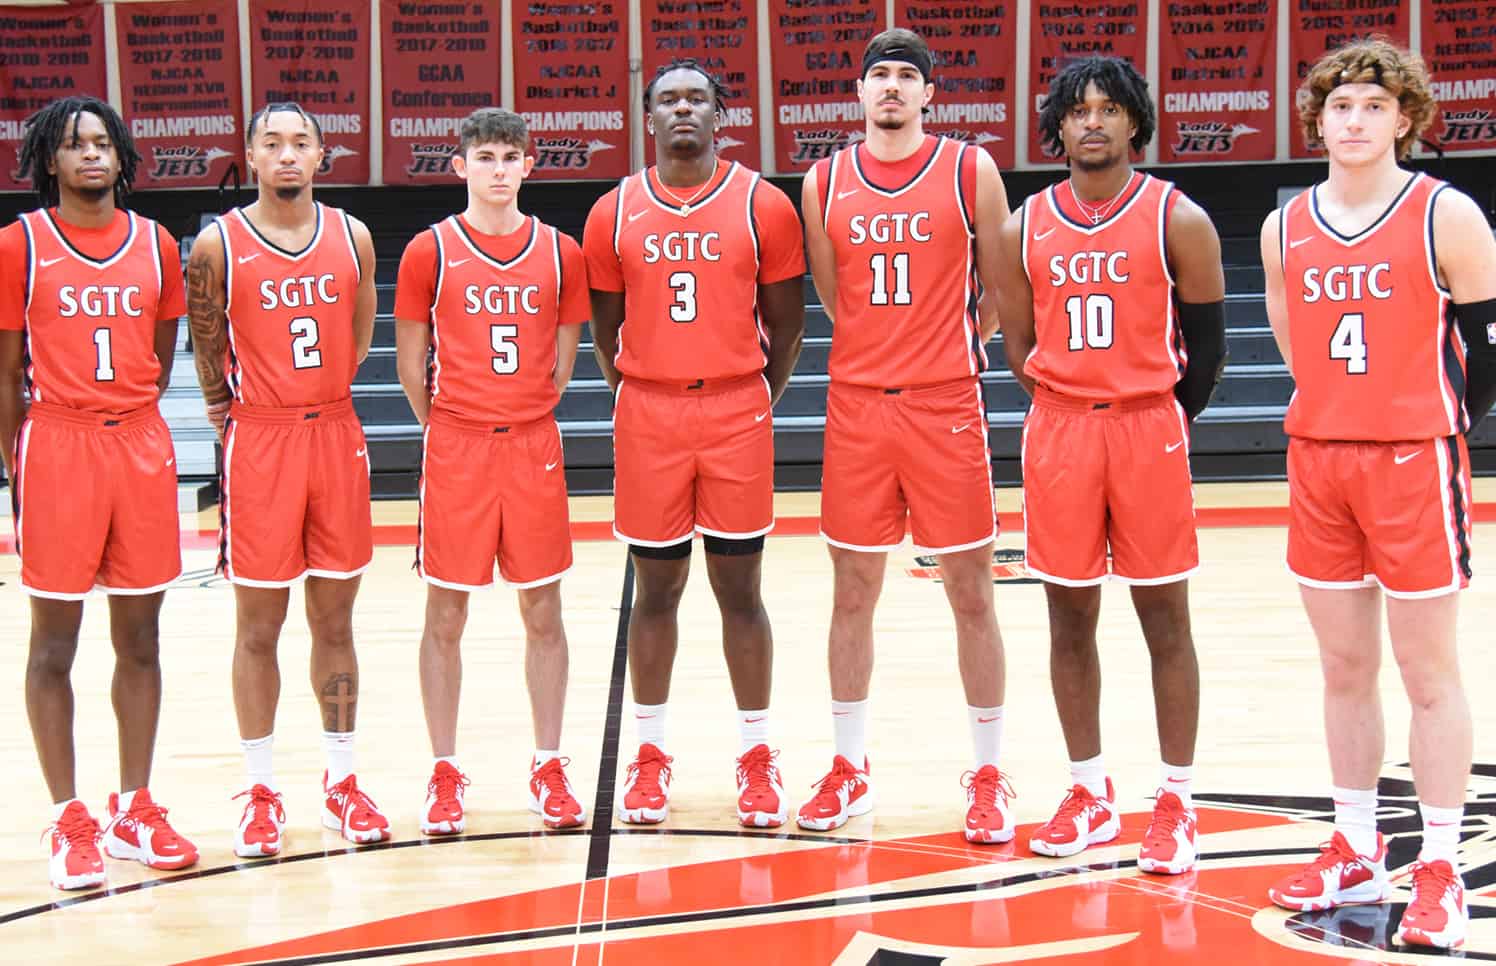 The sophomores led the Jets to an impressive victory over the nationally ranked Shelton State Bucs. Shown (l to r) are sophomores Malik Battle (1), Justice Hayes (2), Kallin Fonesca (5), Jalen Reynolds (3), Matija Milivojevic (11), Marvin McGhee, III, and Will Johnston, (4).